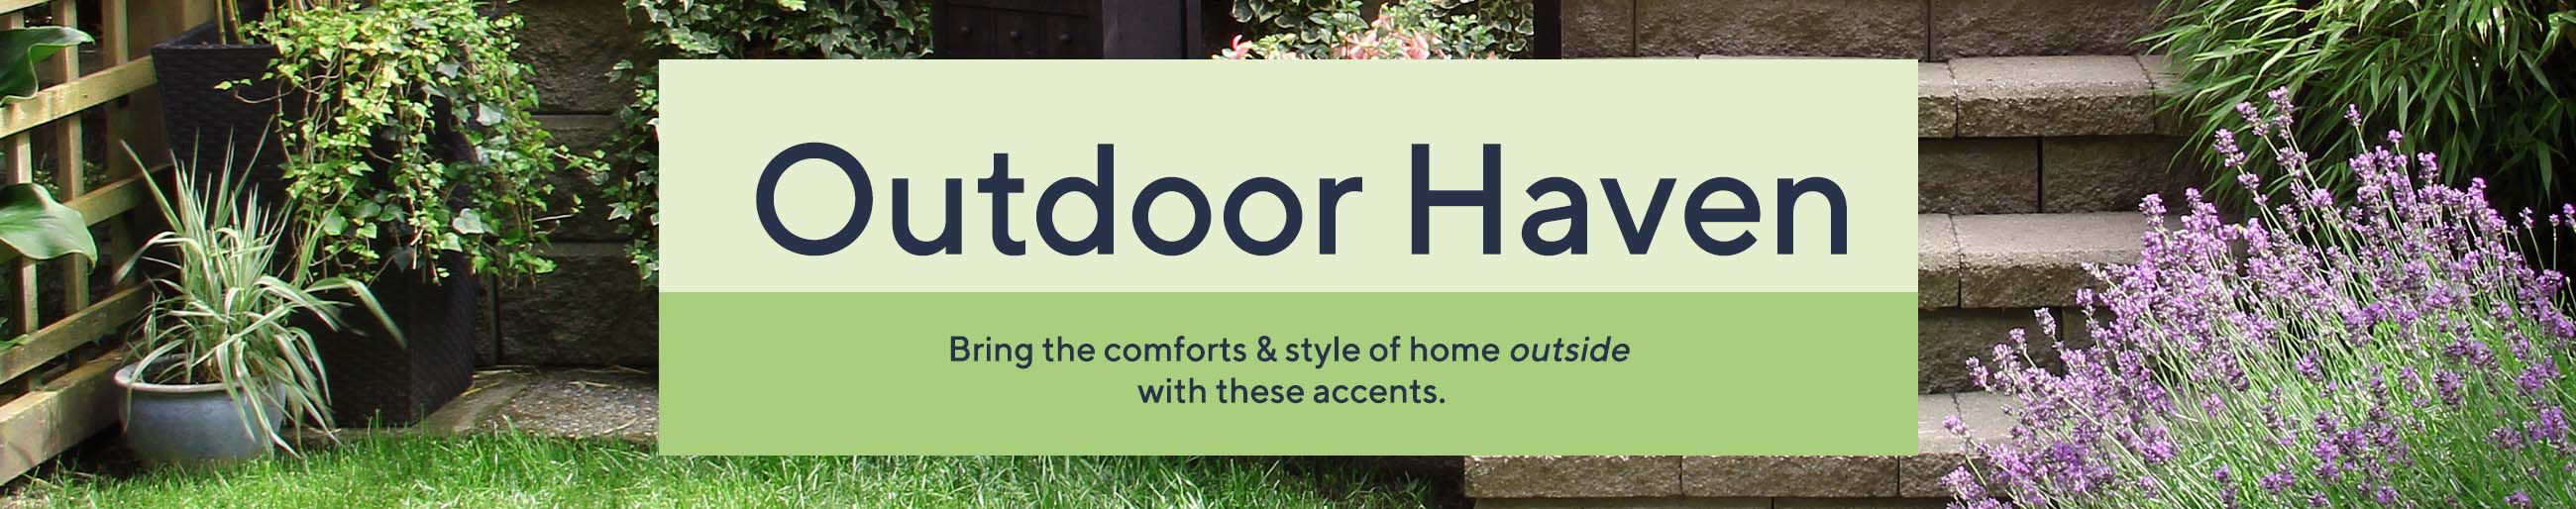 Outdoor Haven - Bring the comforts & style of home outside with these accents.